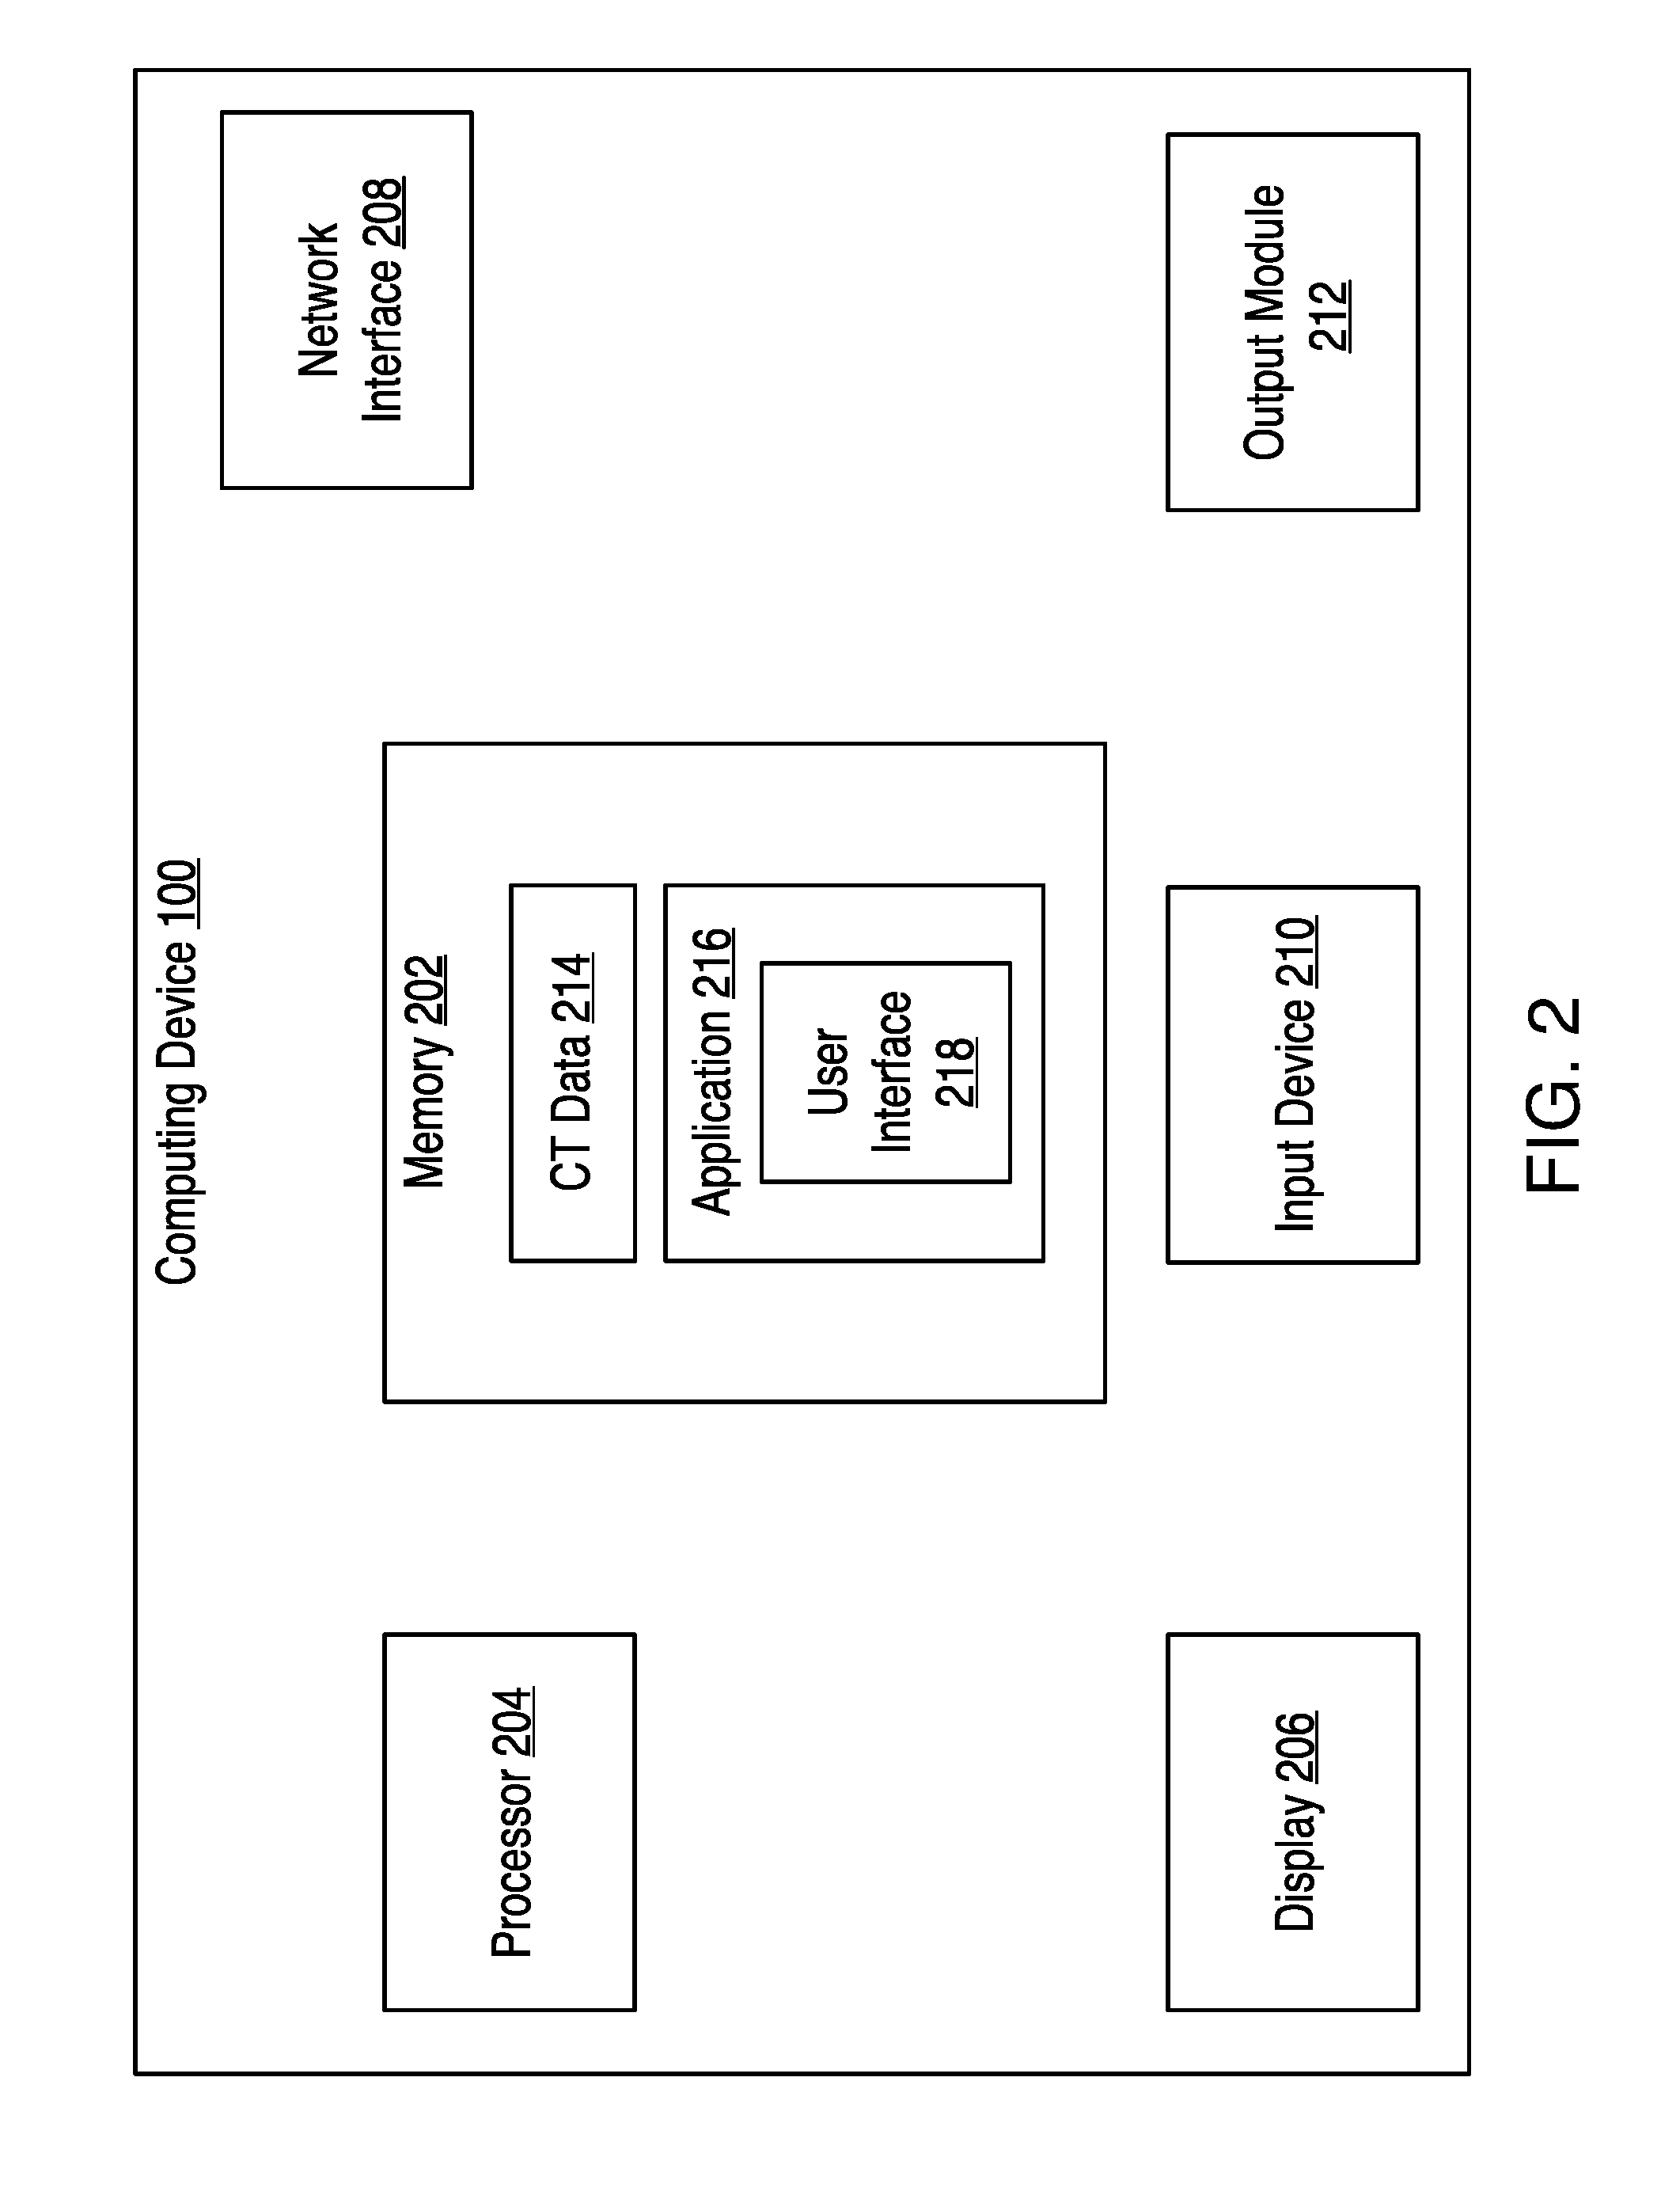 Microwave ablation planning and procedure systems